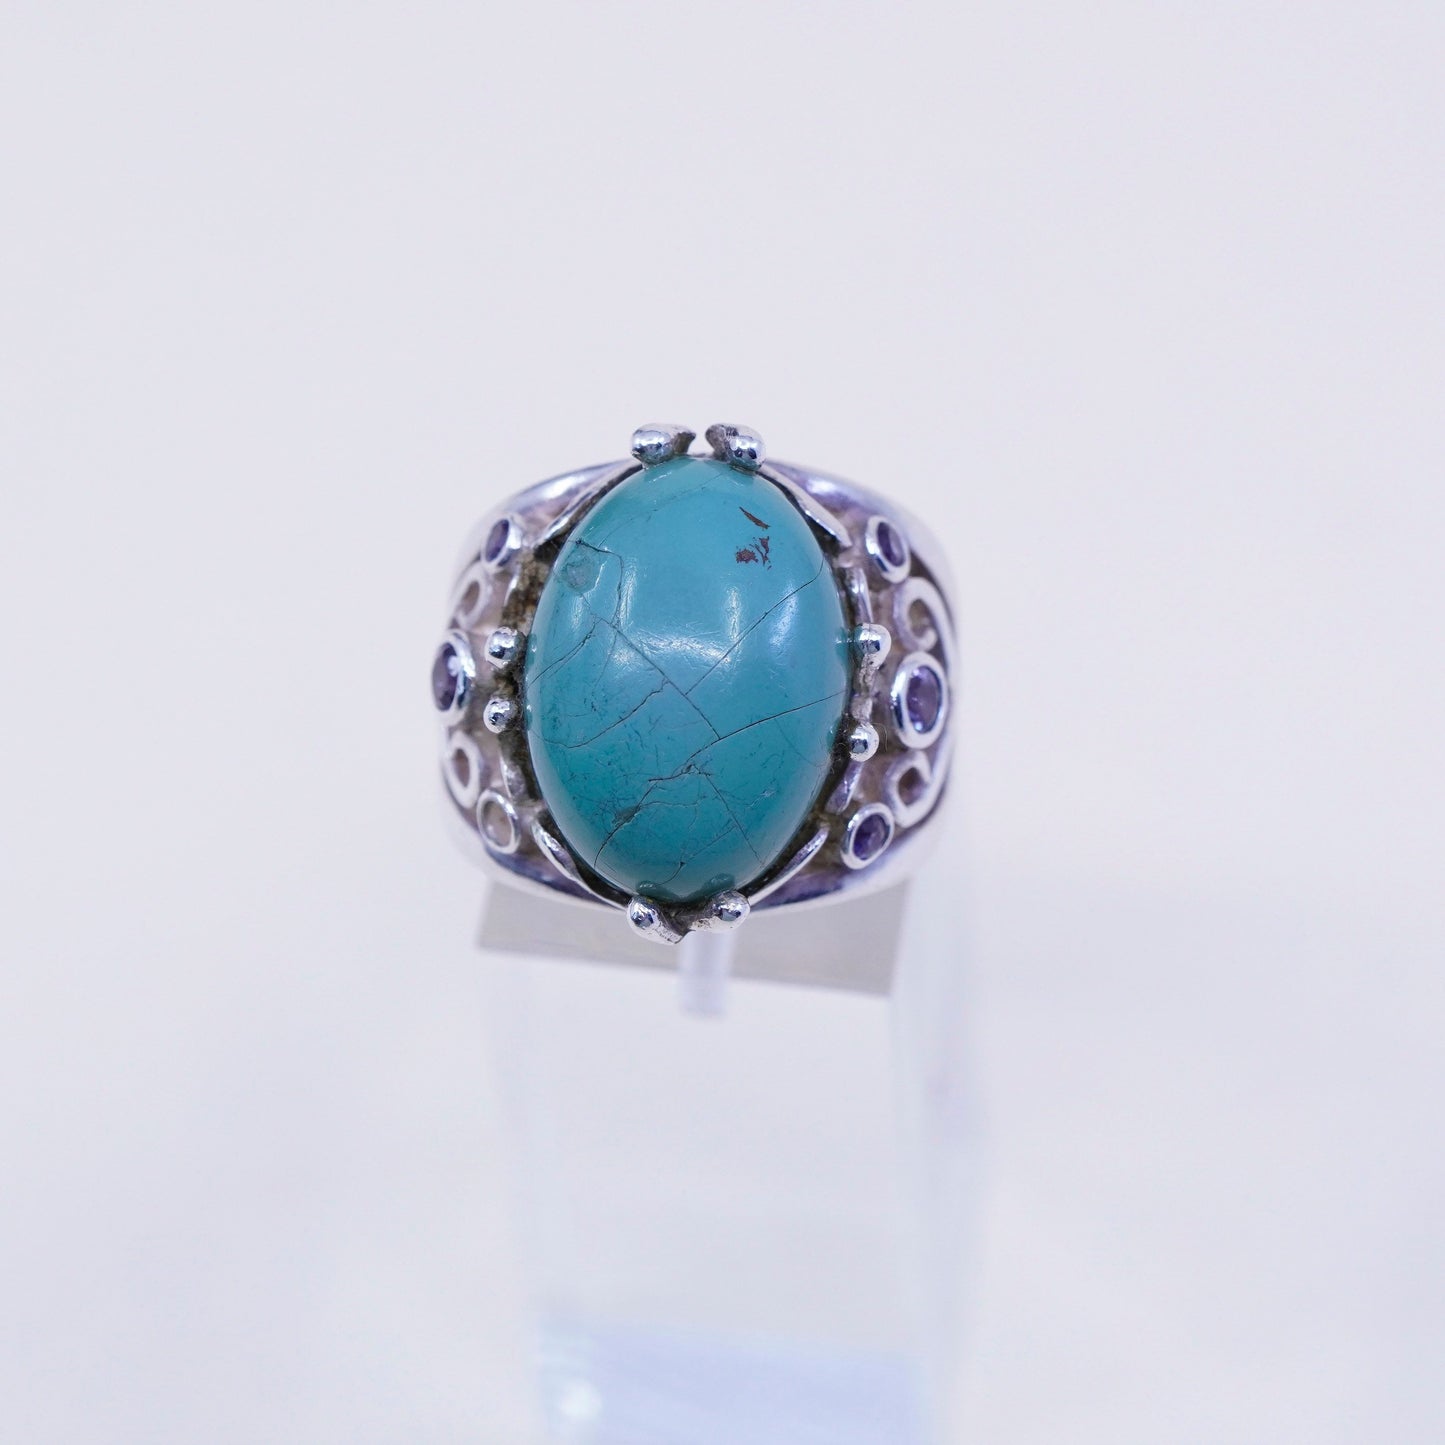 Size 7.25, Vintage sterling 925 silver filigree ring w/ turquoise and amethyst